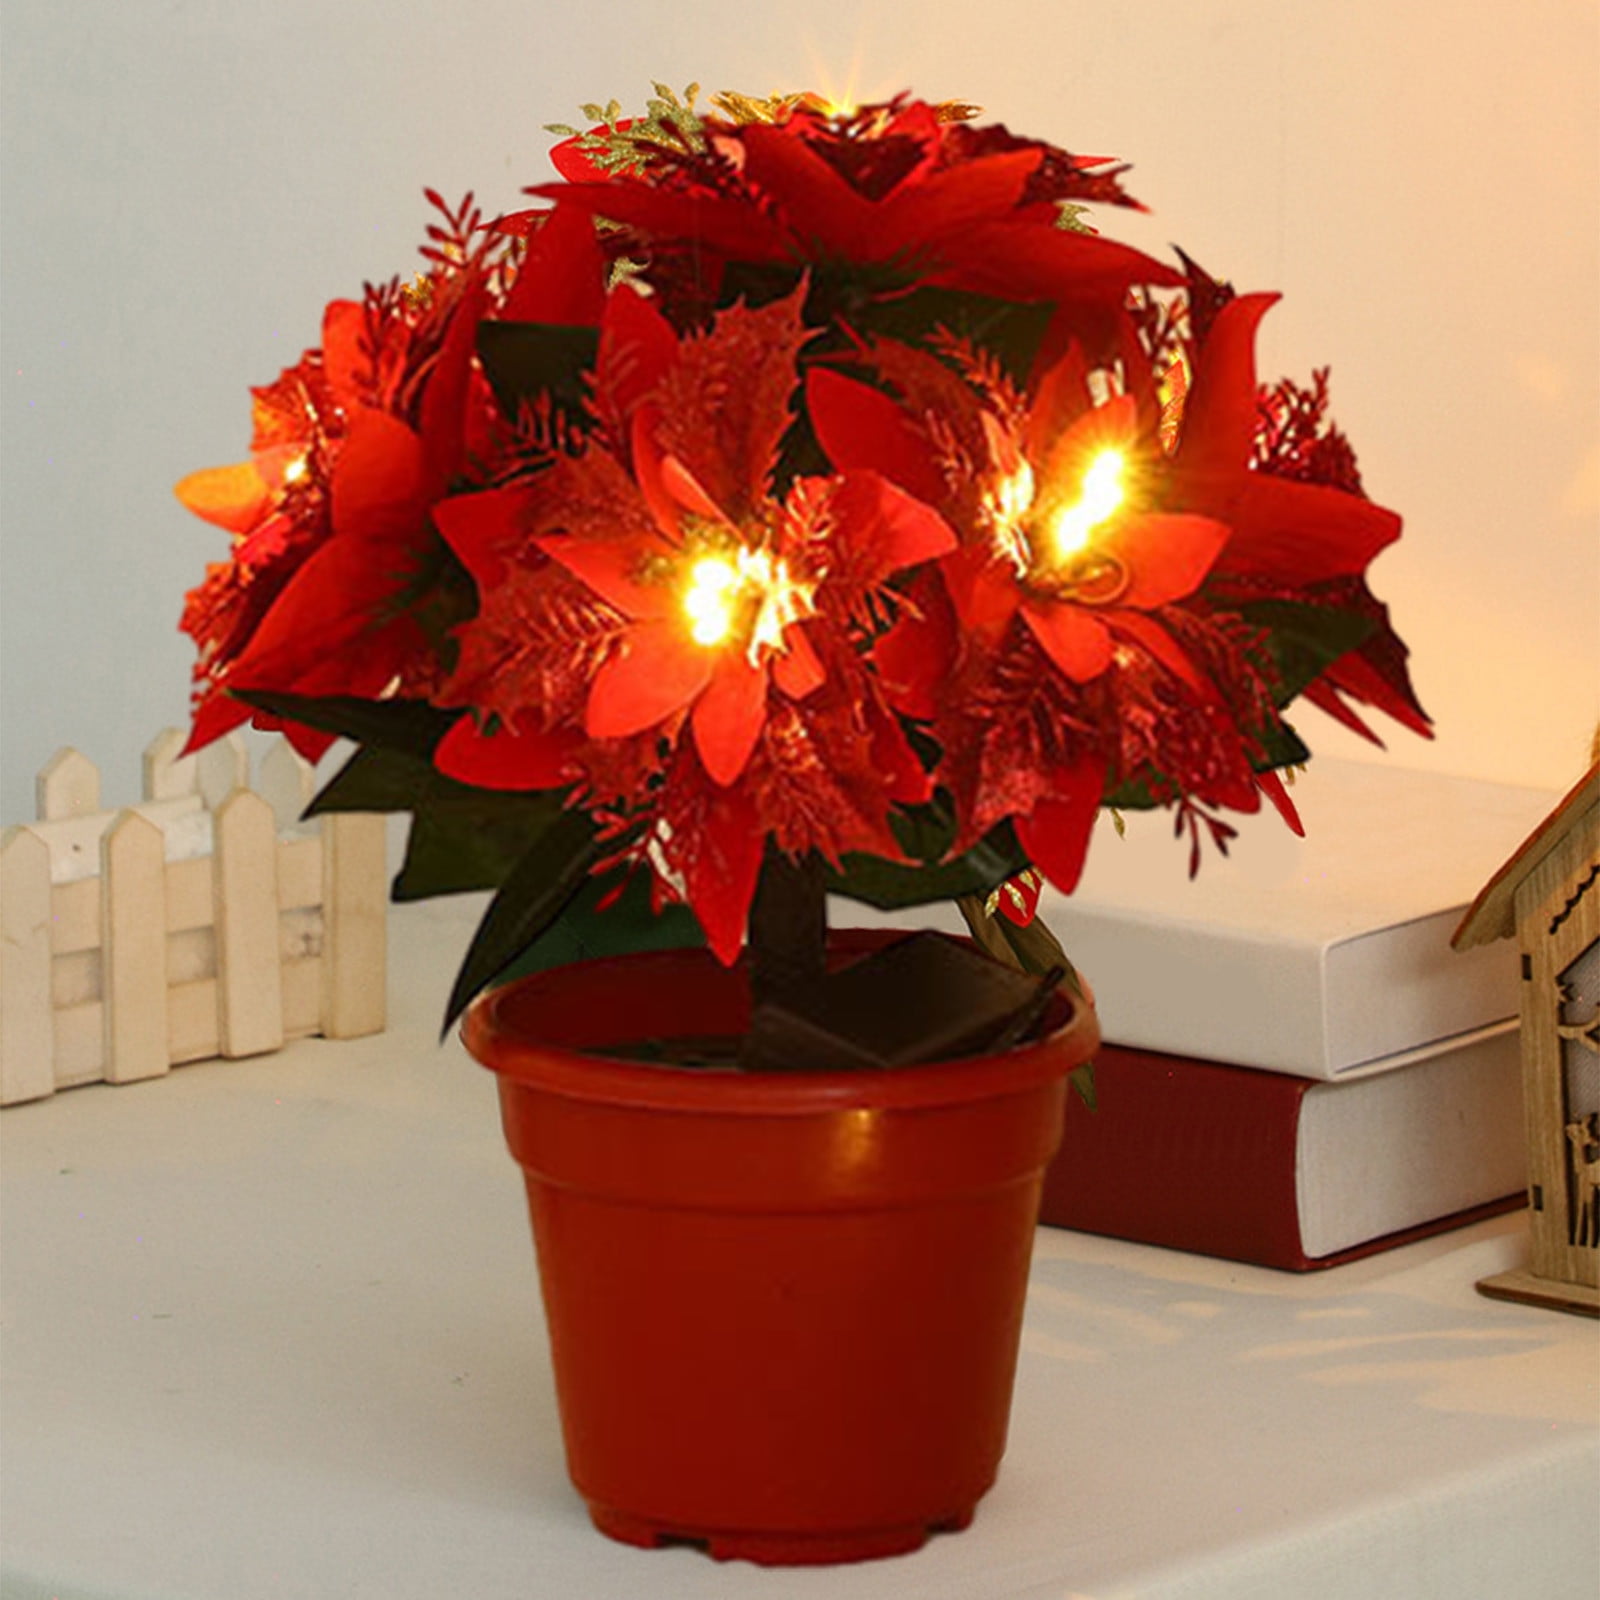 HO2NLE Christmas Artificial Flowers LED Lighted Poinsettias Pine Neddle  Potted Christmas Decorations Indoor Home Xmas Table Centerpieces Winter